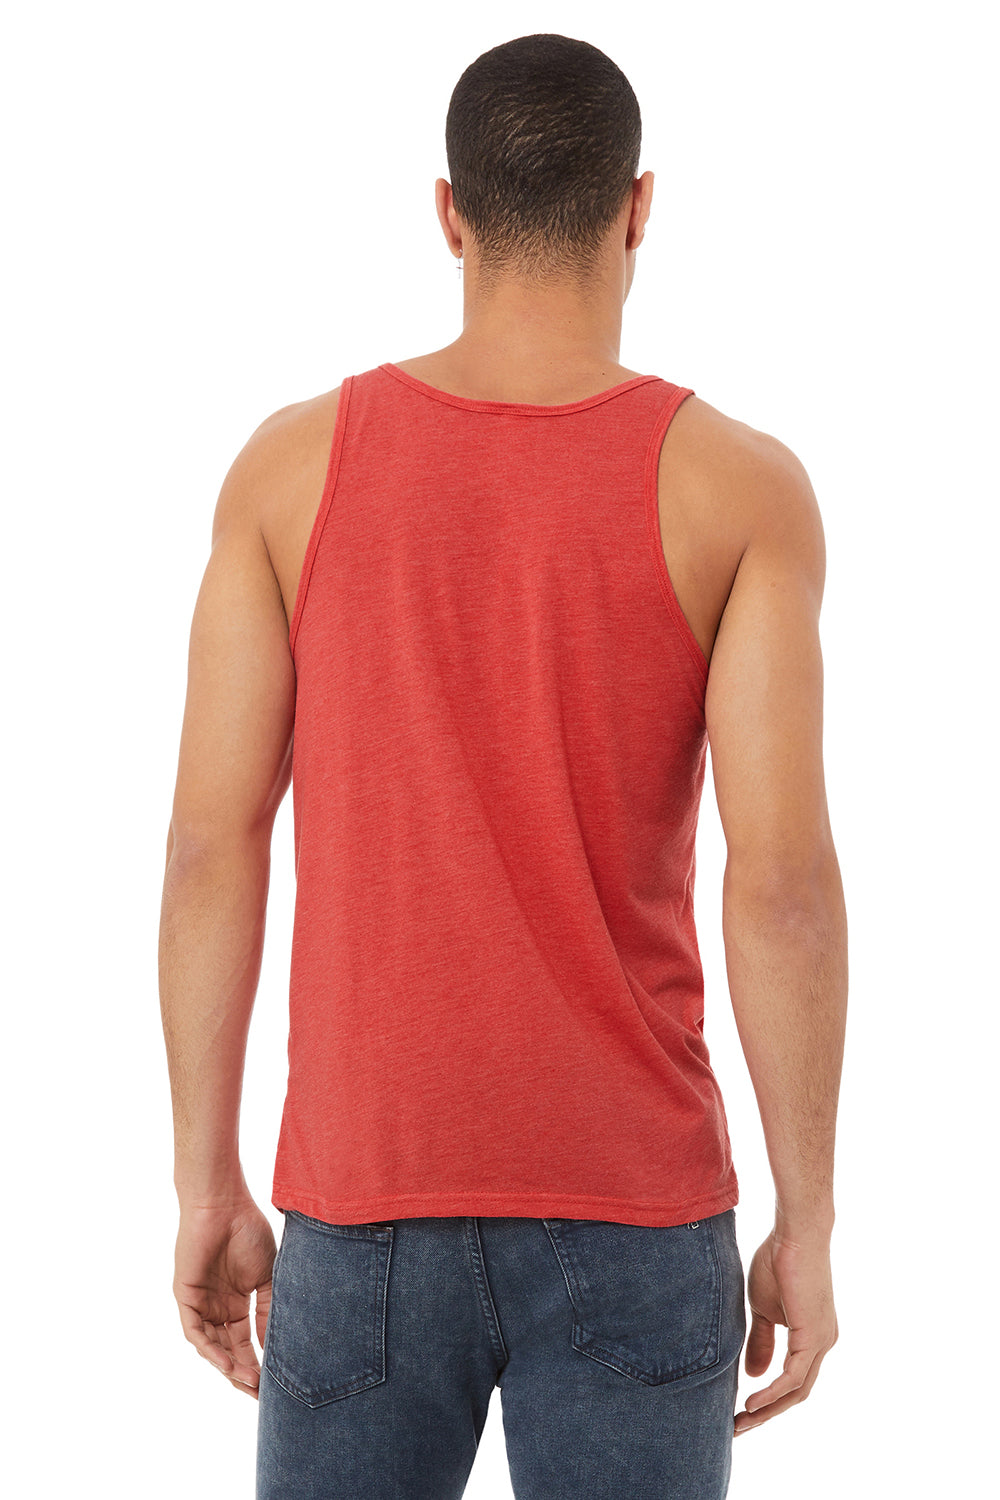 Bella + Canvas BC3480/3480 Mens Jersey Tank Top Red Triblend Model Back